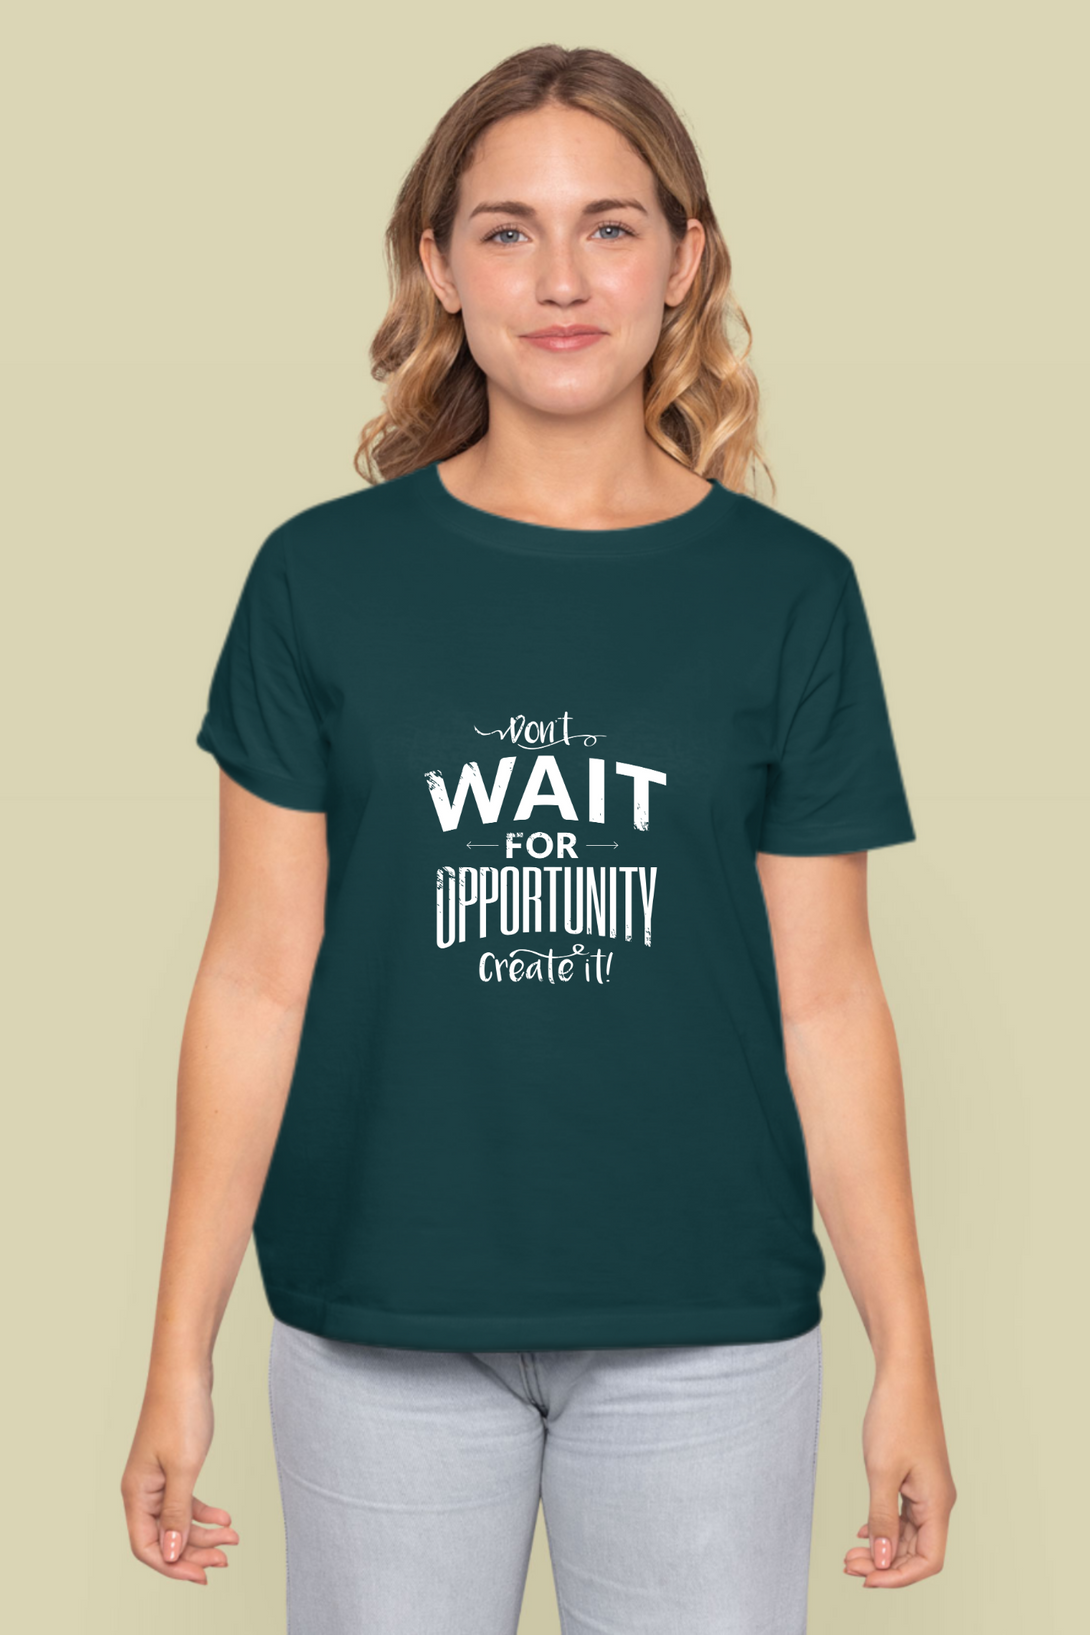 Create Opportunity Printed T-Shirt For Women - WowWaves - 12